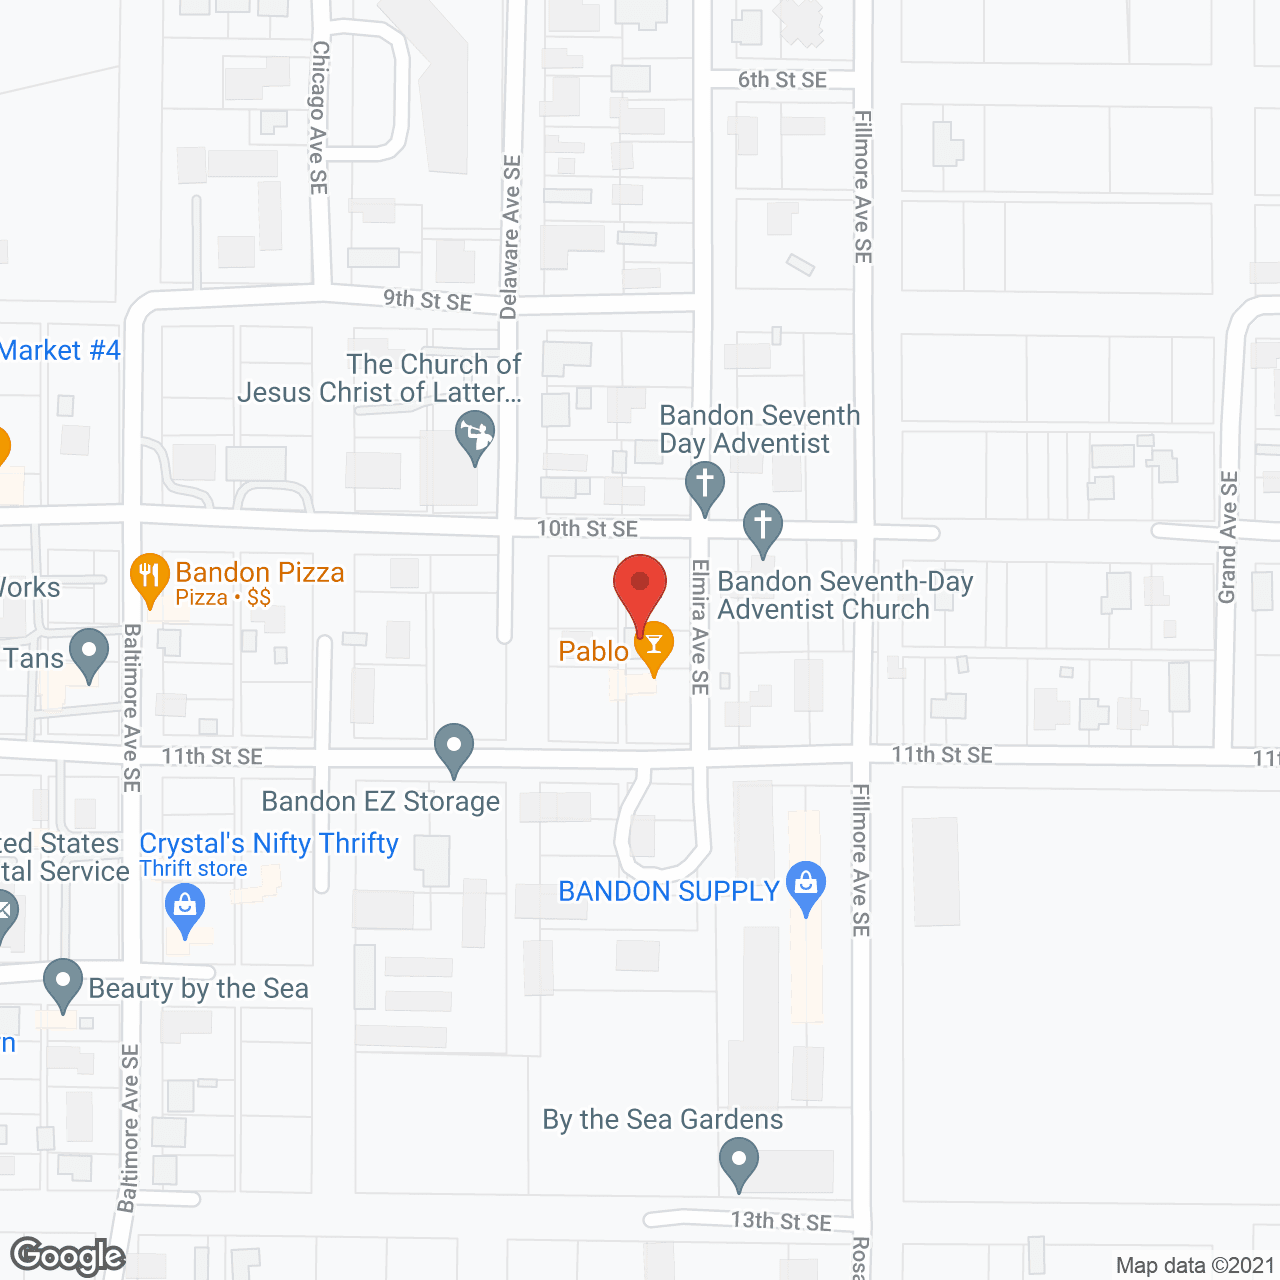 Angels' Care Adult Foster Home in google map